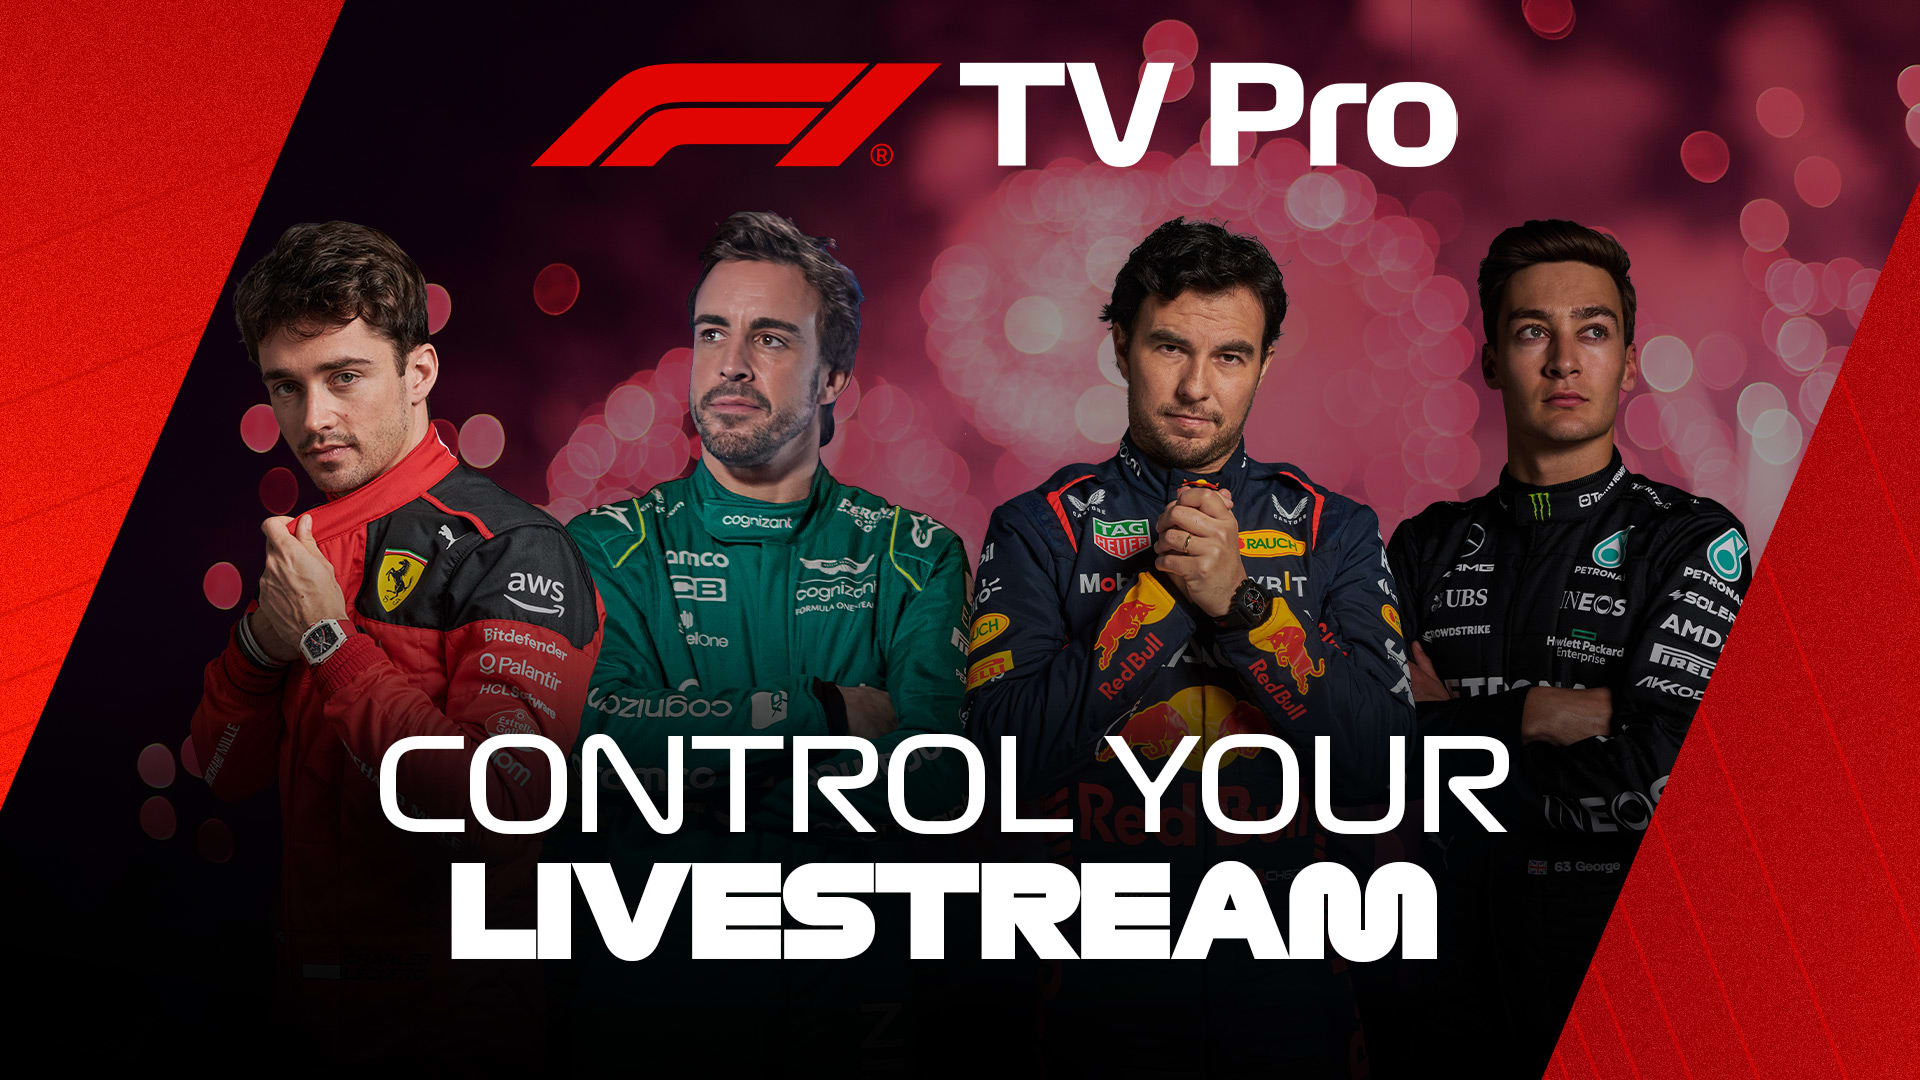 How to stream the 2023 Hungarian Grand Prix on F1 TV Pro Formula 1®